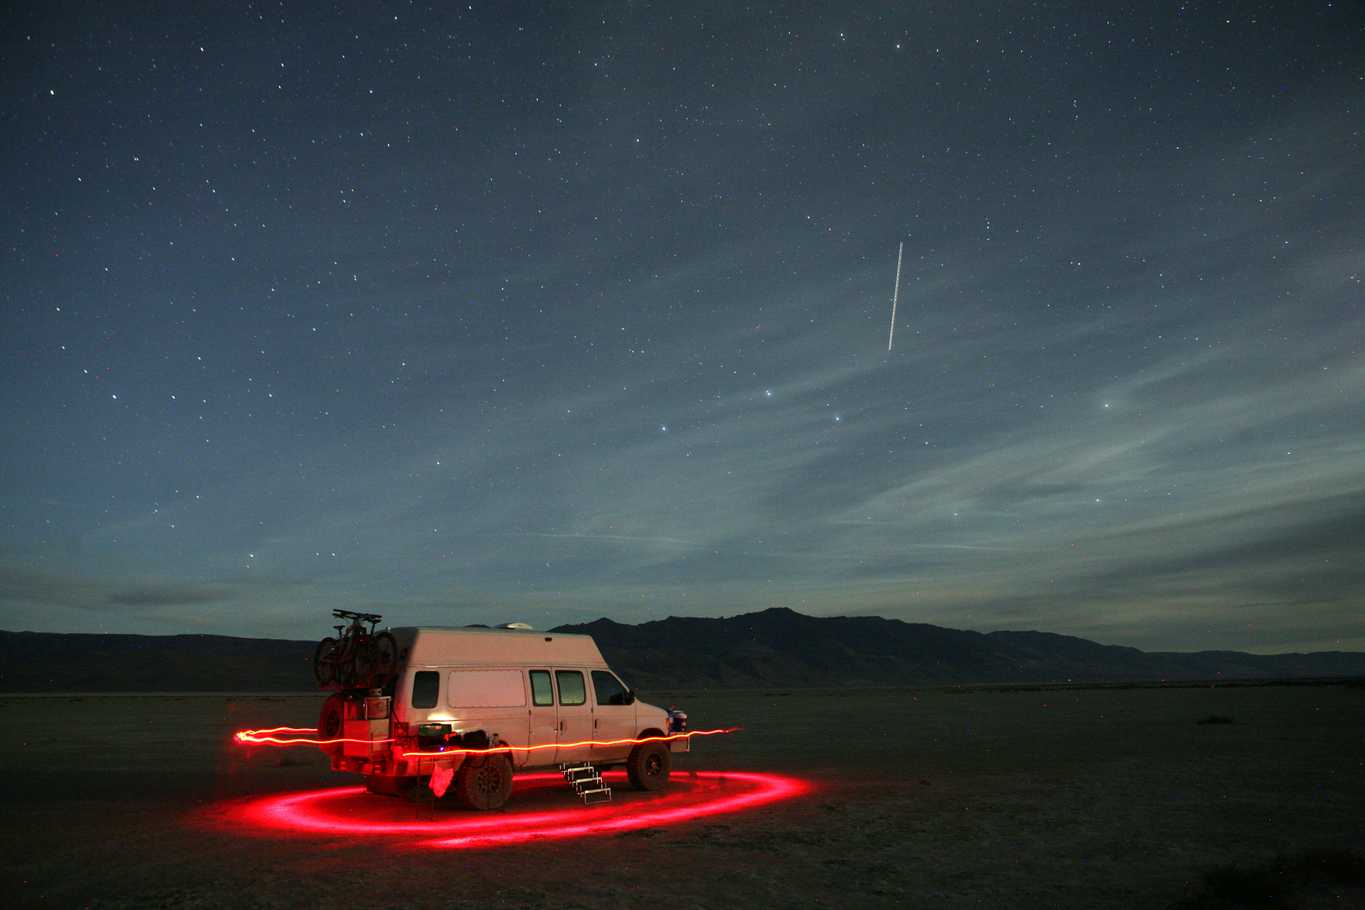 The night sky at the Alvord Desert with our van encircled by a red headlamp in a long exposure